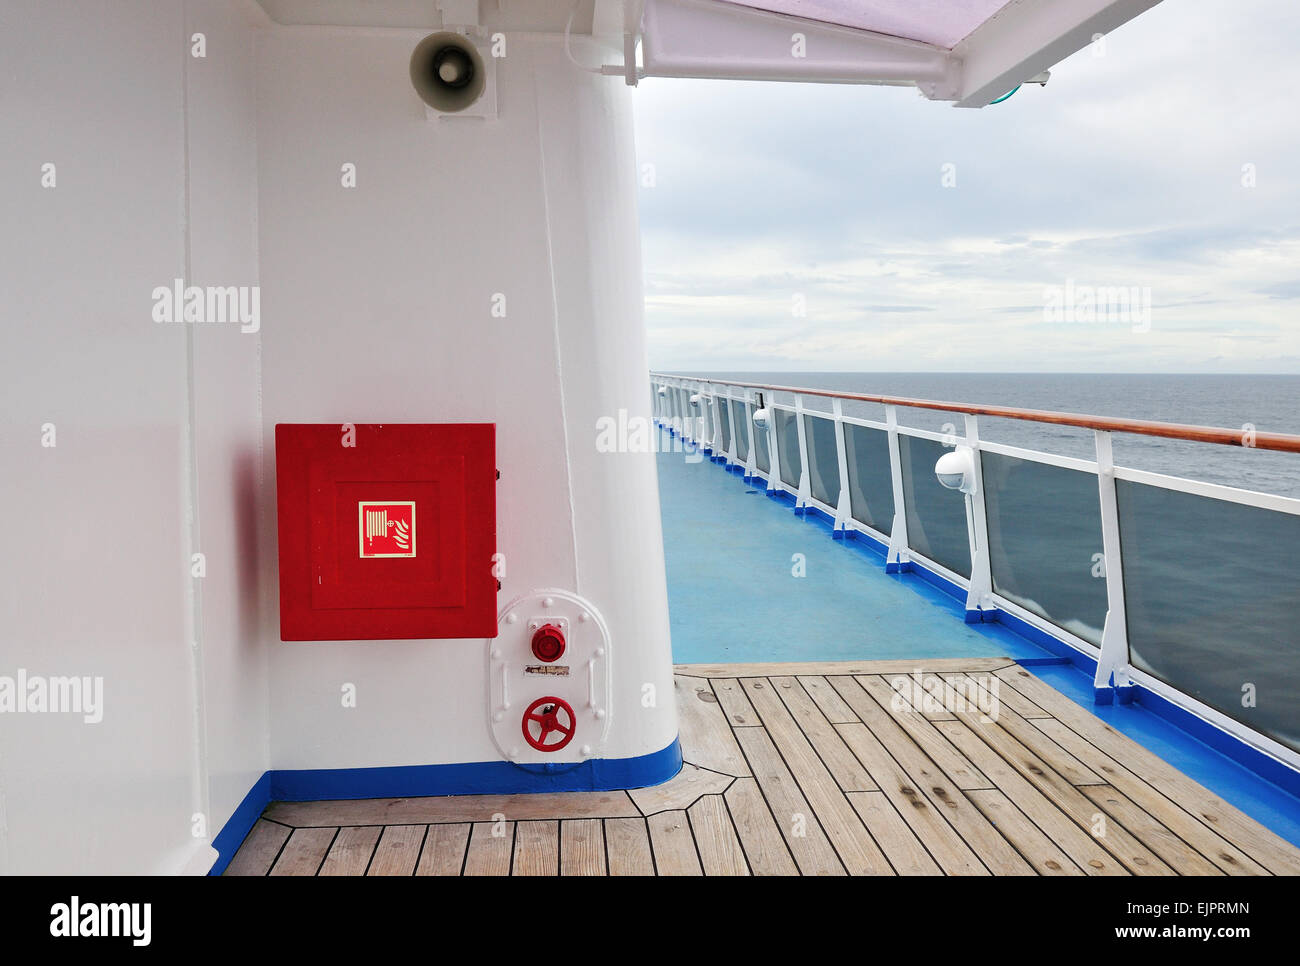 White painted wall of a luxury cruise ship exterior image, with fire hose reel on a wall. Stock Photo